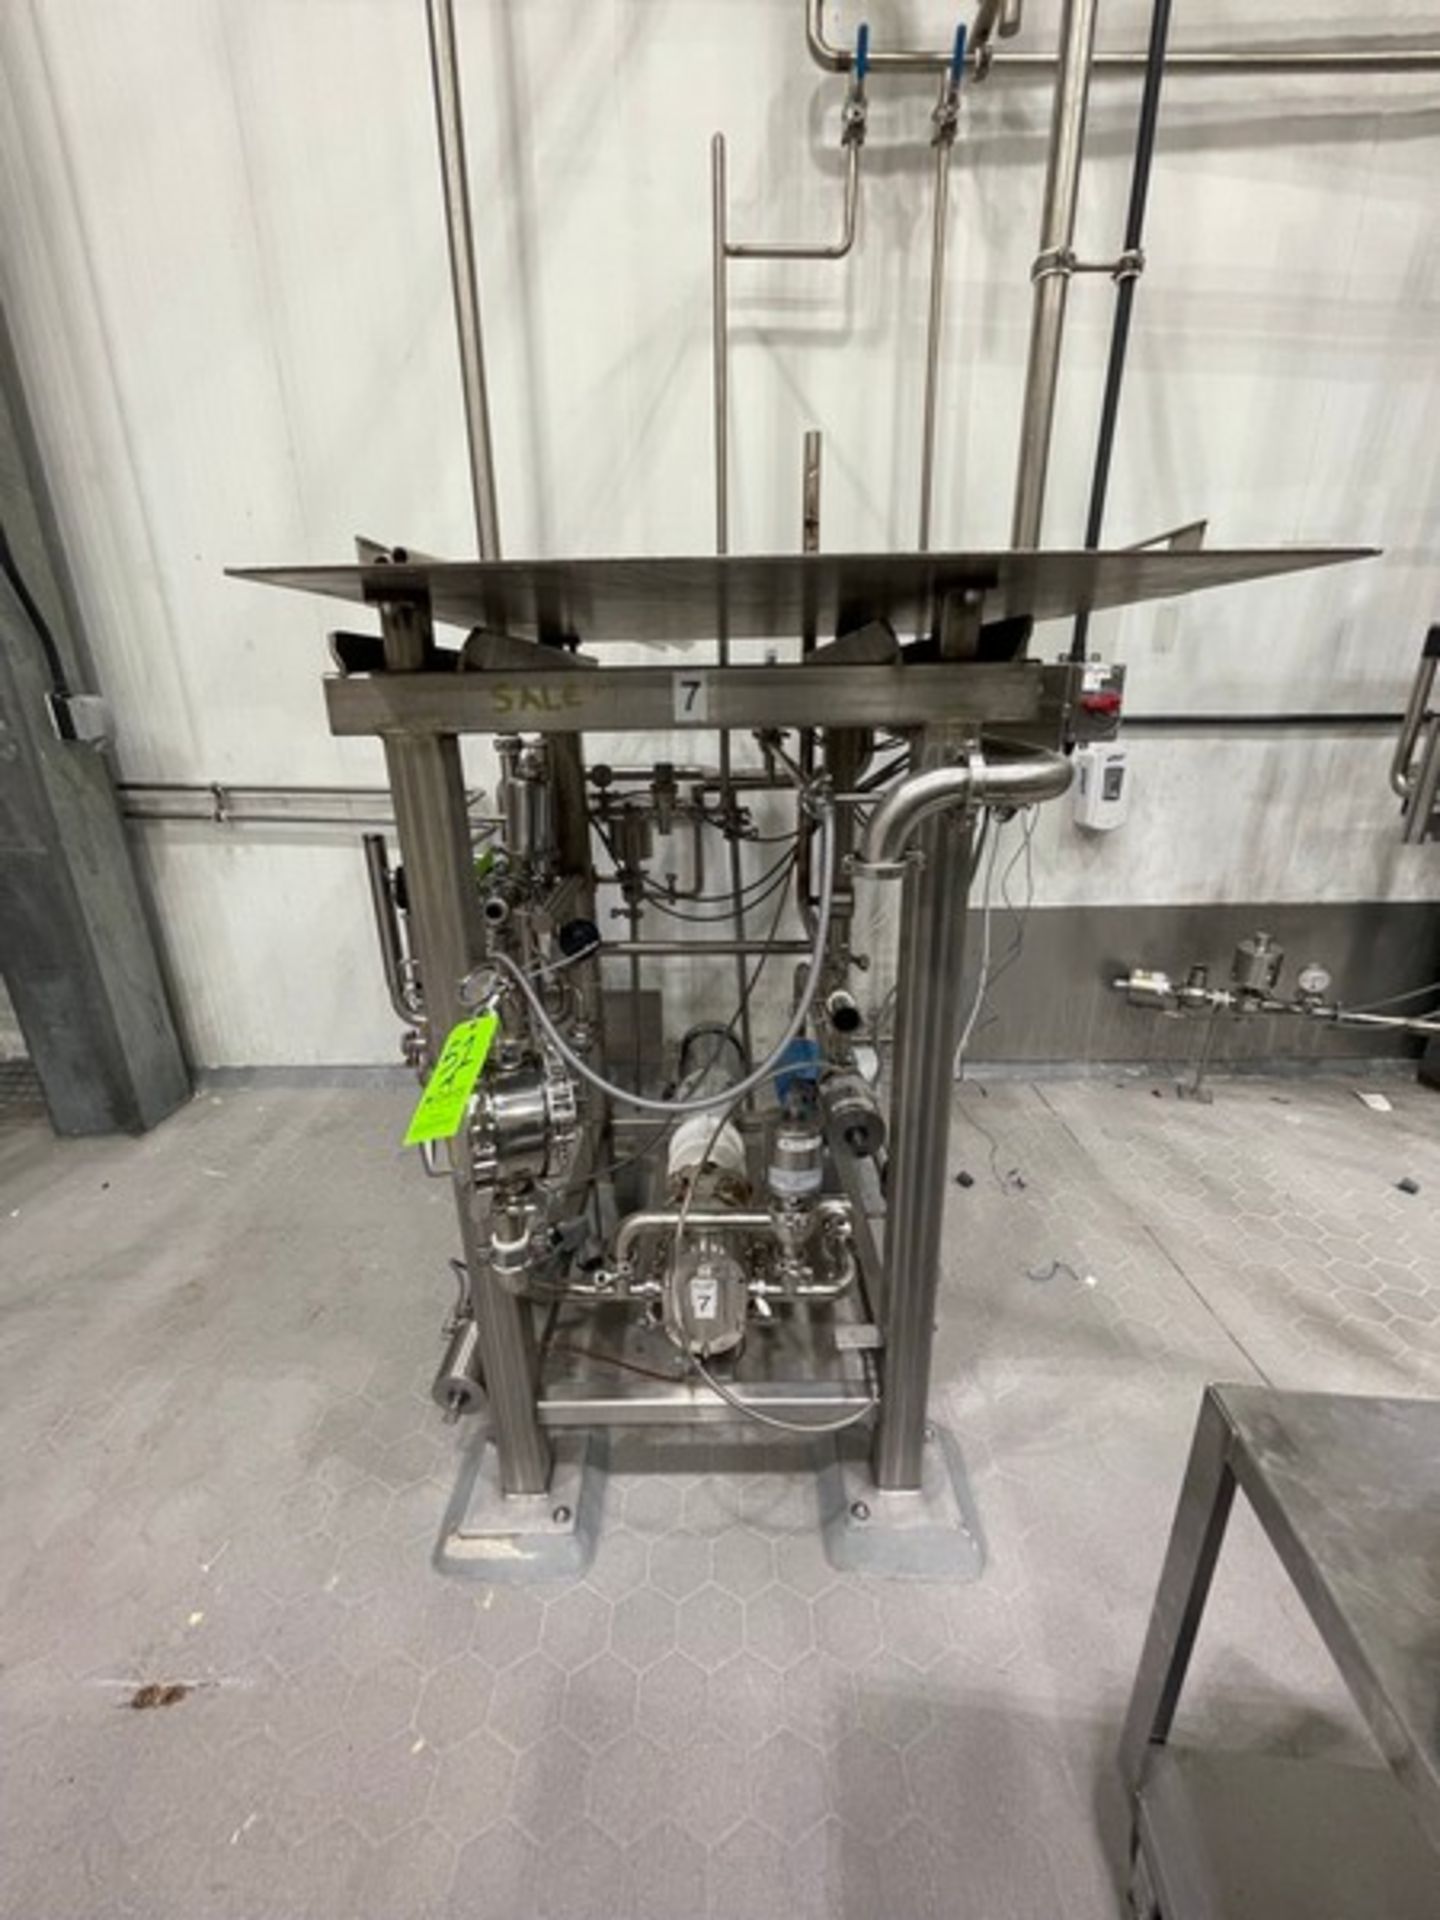 SINGLE FRUIT SKID, OPERATED WITH MODERN PACKAGING CUP FILLER LOT 50, INCLUDES FRISTAM POSITIVE - Image 5 of 11